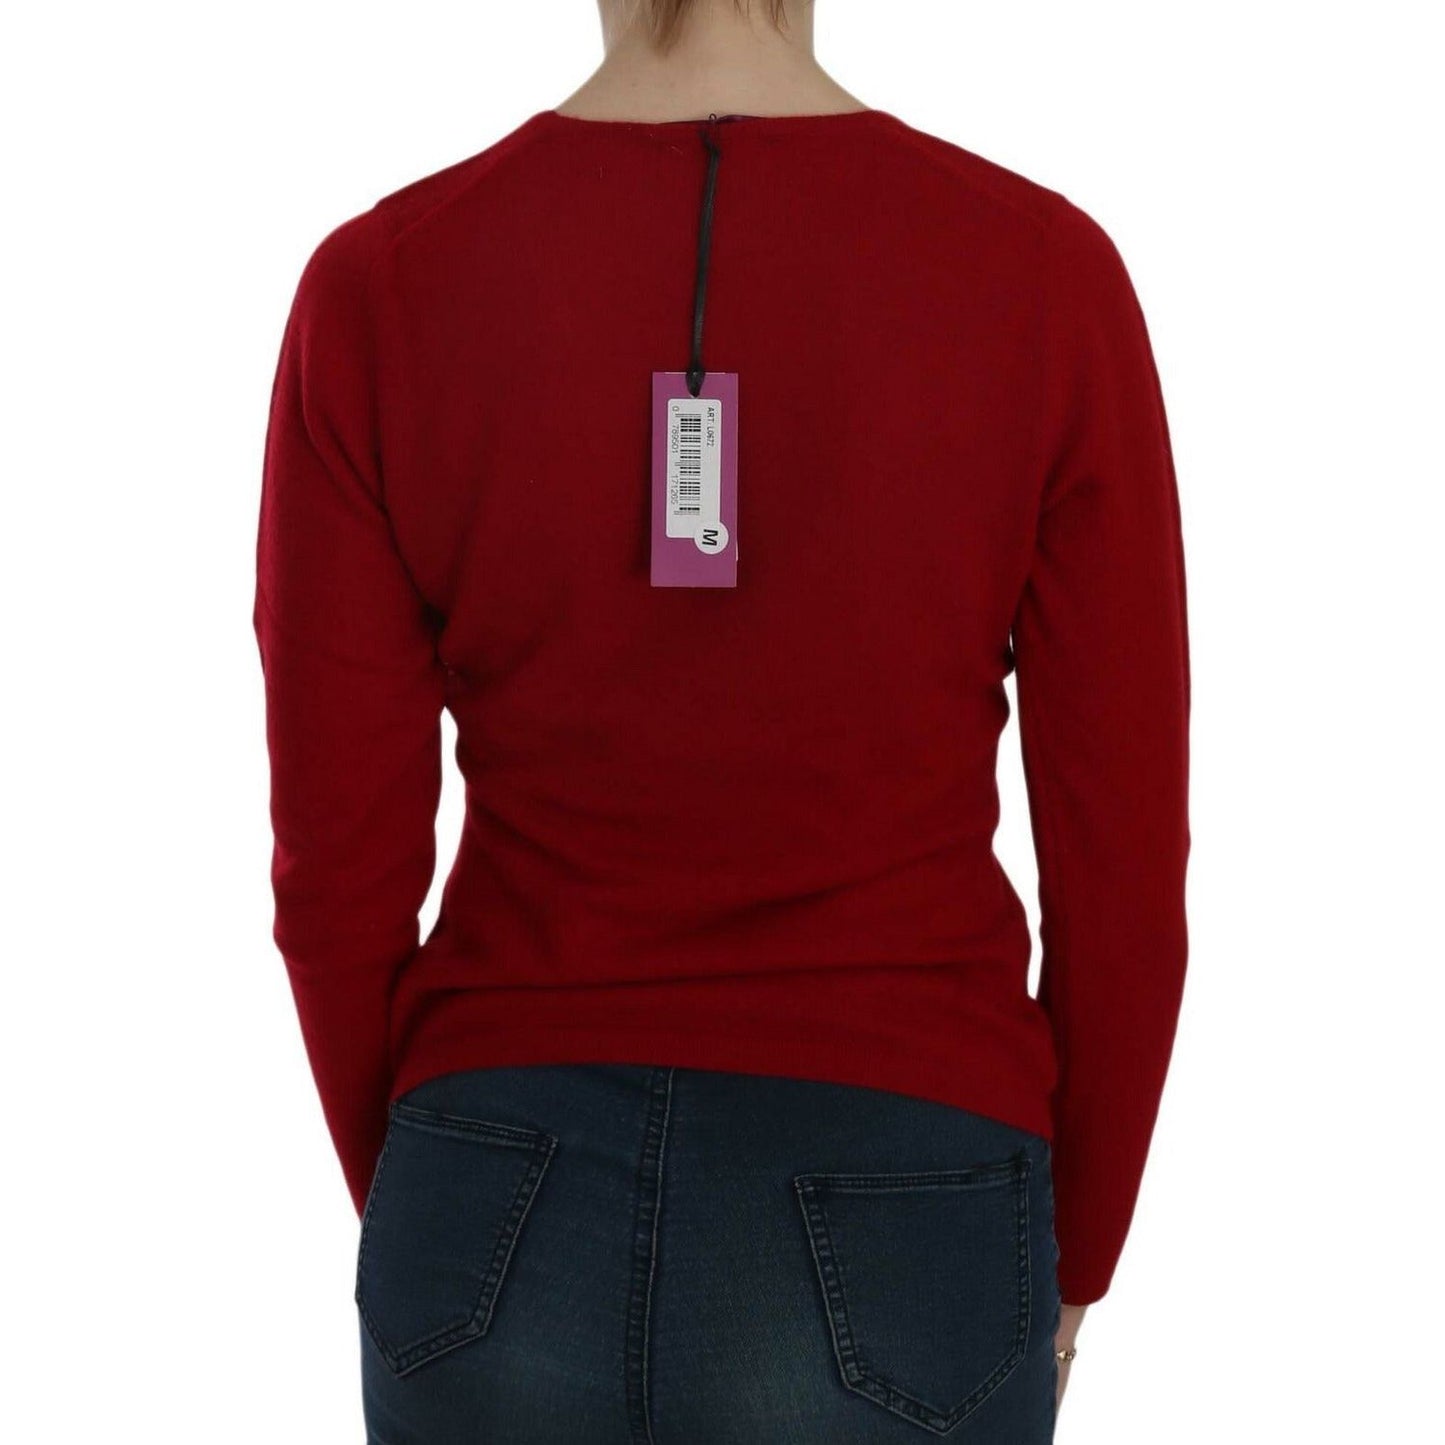 MILA SCHÖN Elegant Red Cashmere Pullover Blouse WOMAN SWEATERS red-round-neck-pullover-cashmere-sweater